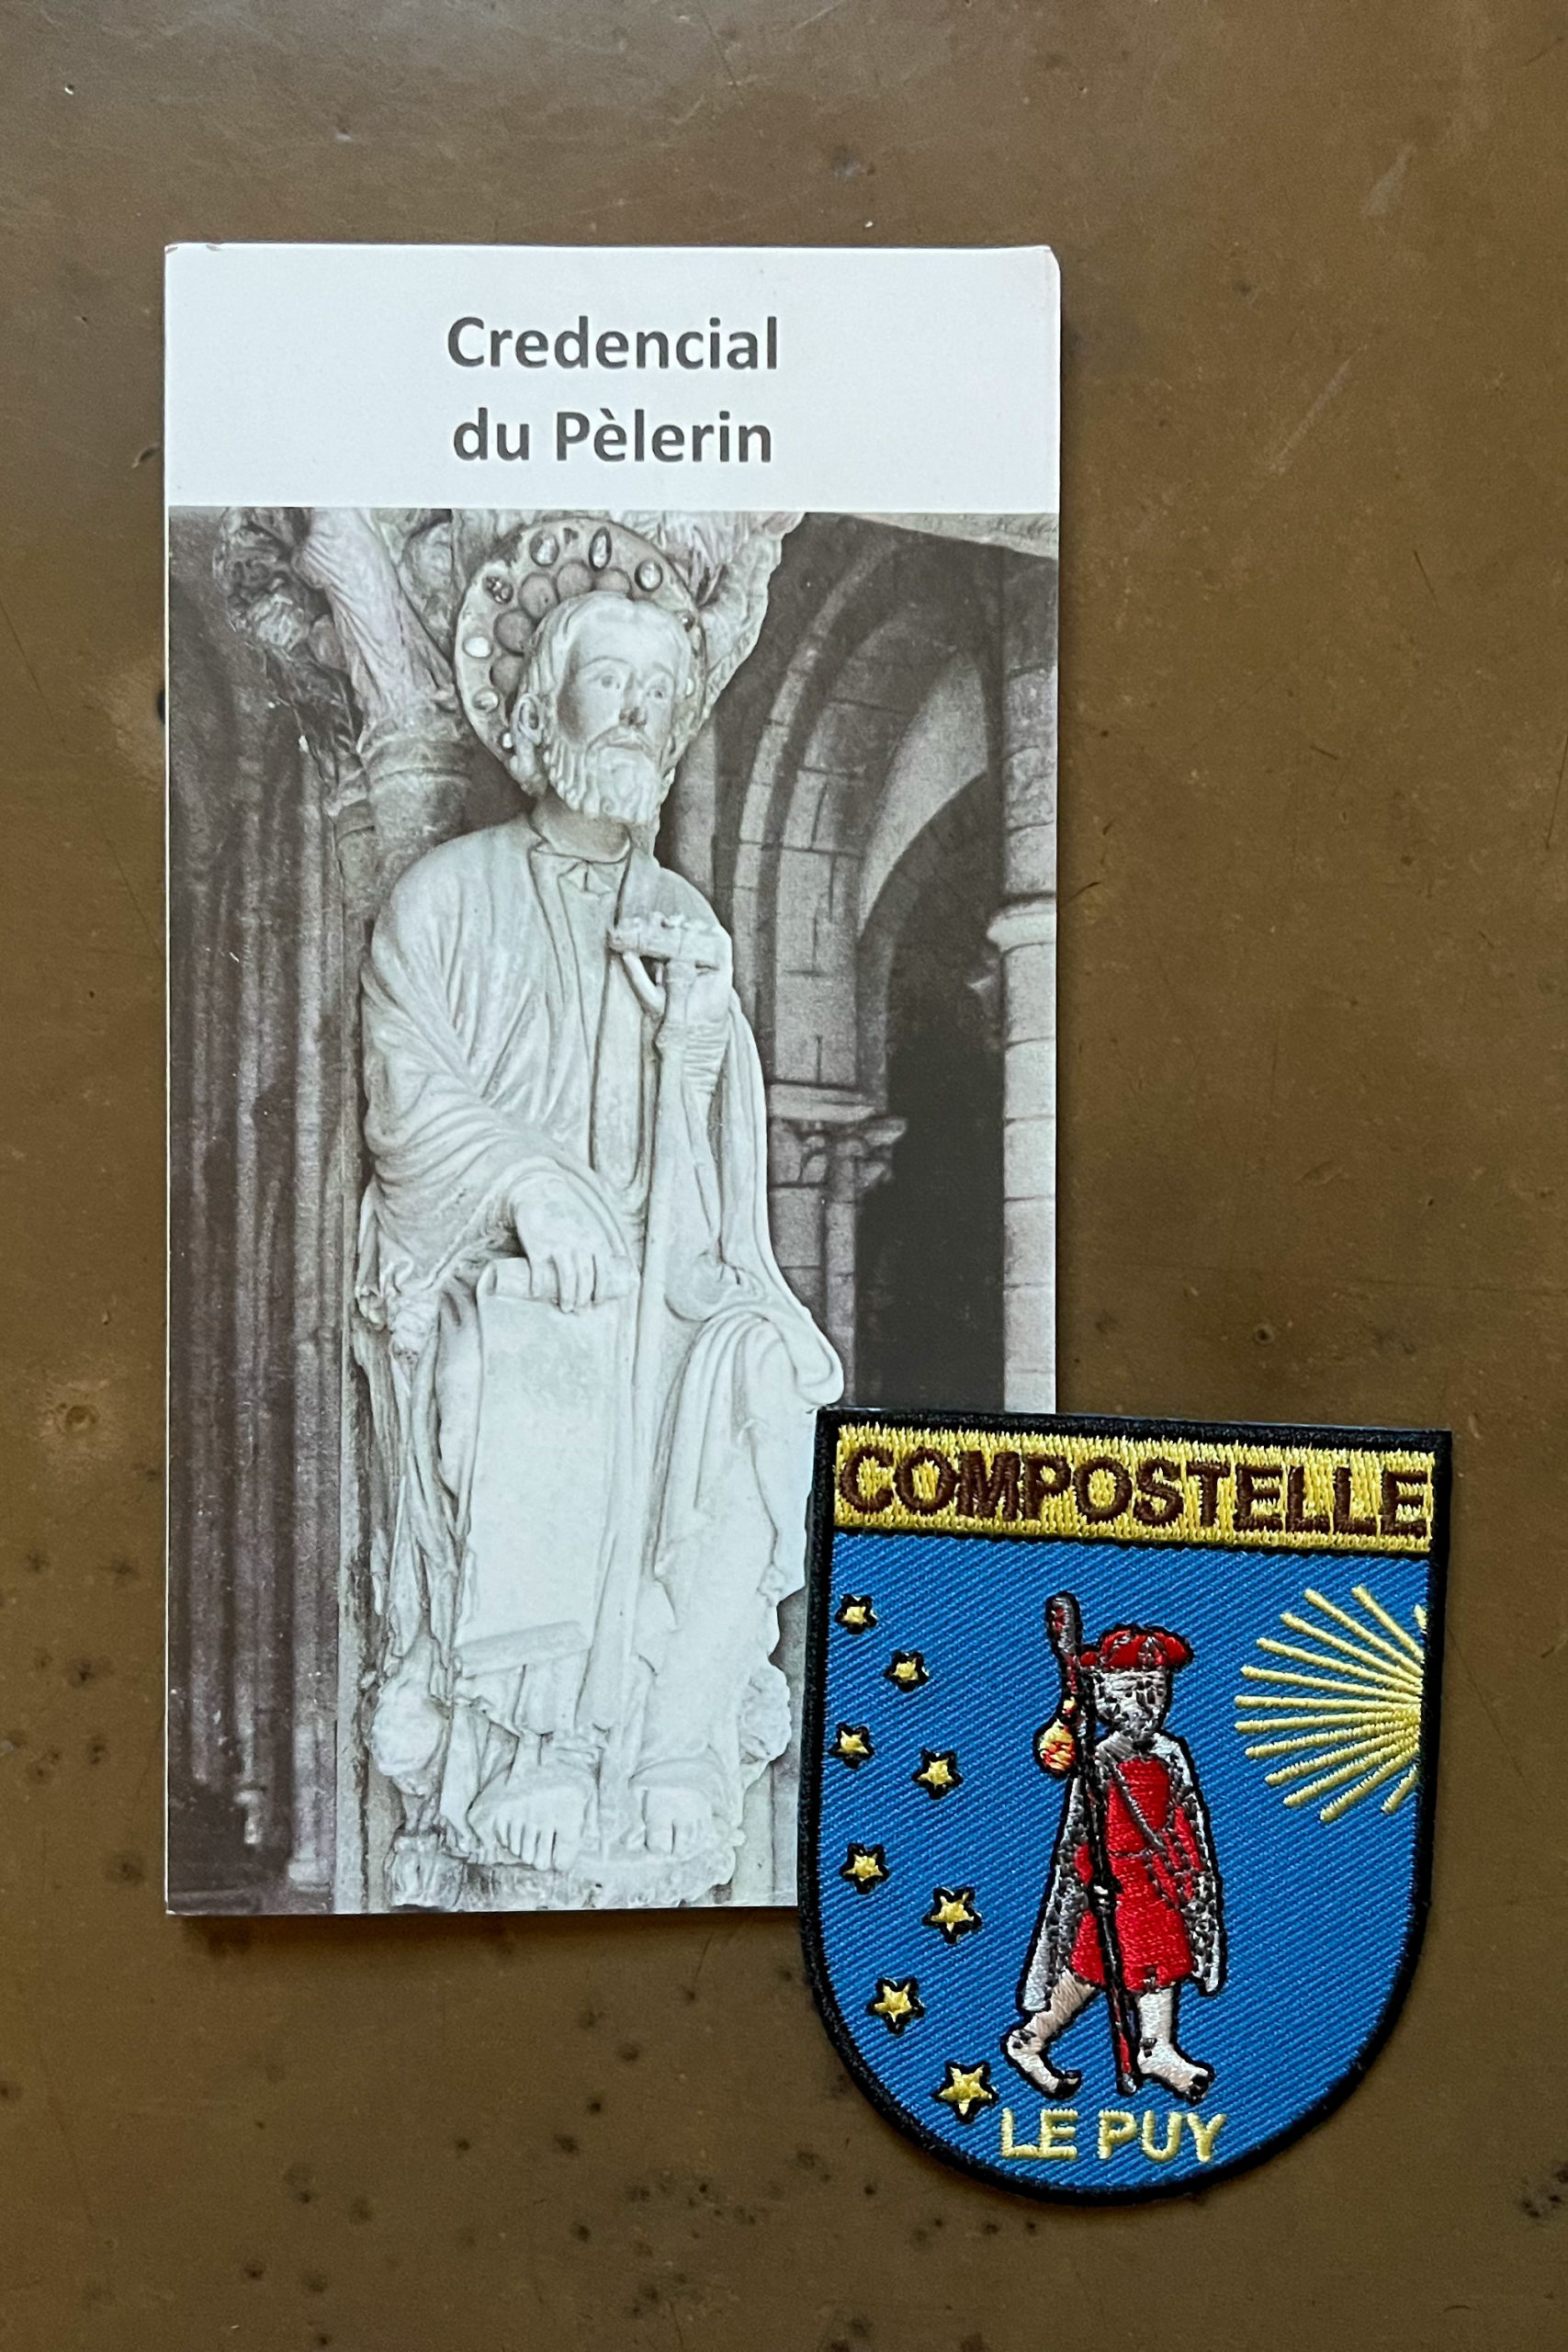 My pilgrim credential and a colony badge that says Compostelle Le Puy and shows a barefoot pilgrim in a red robe and hat and a walking stick